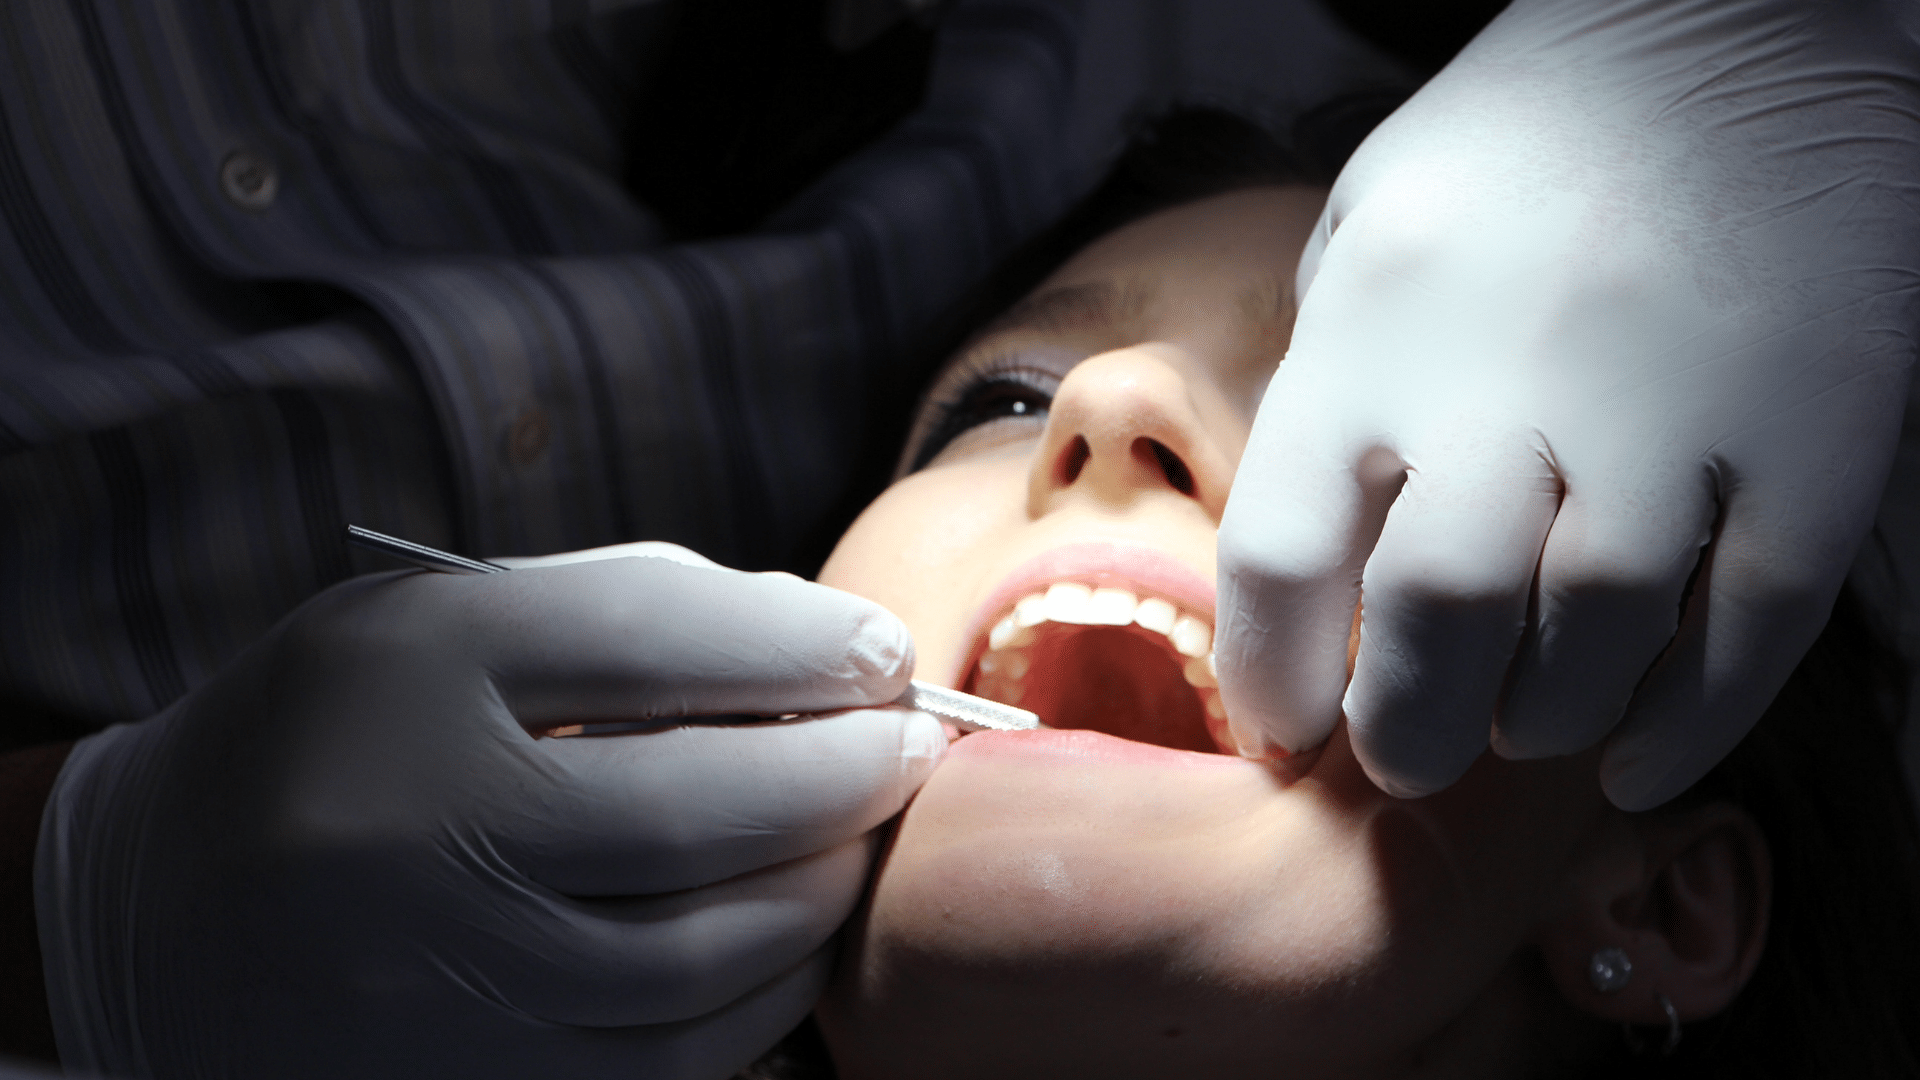 An image of a professional services specialist working on a client in a dentist office.